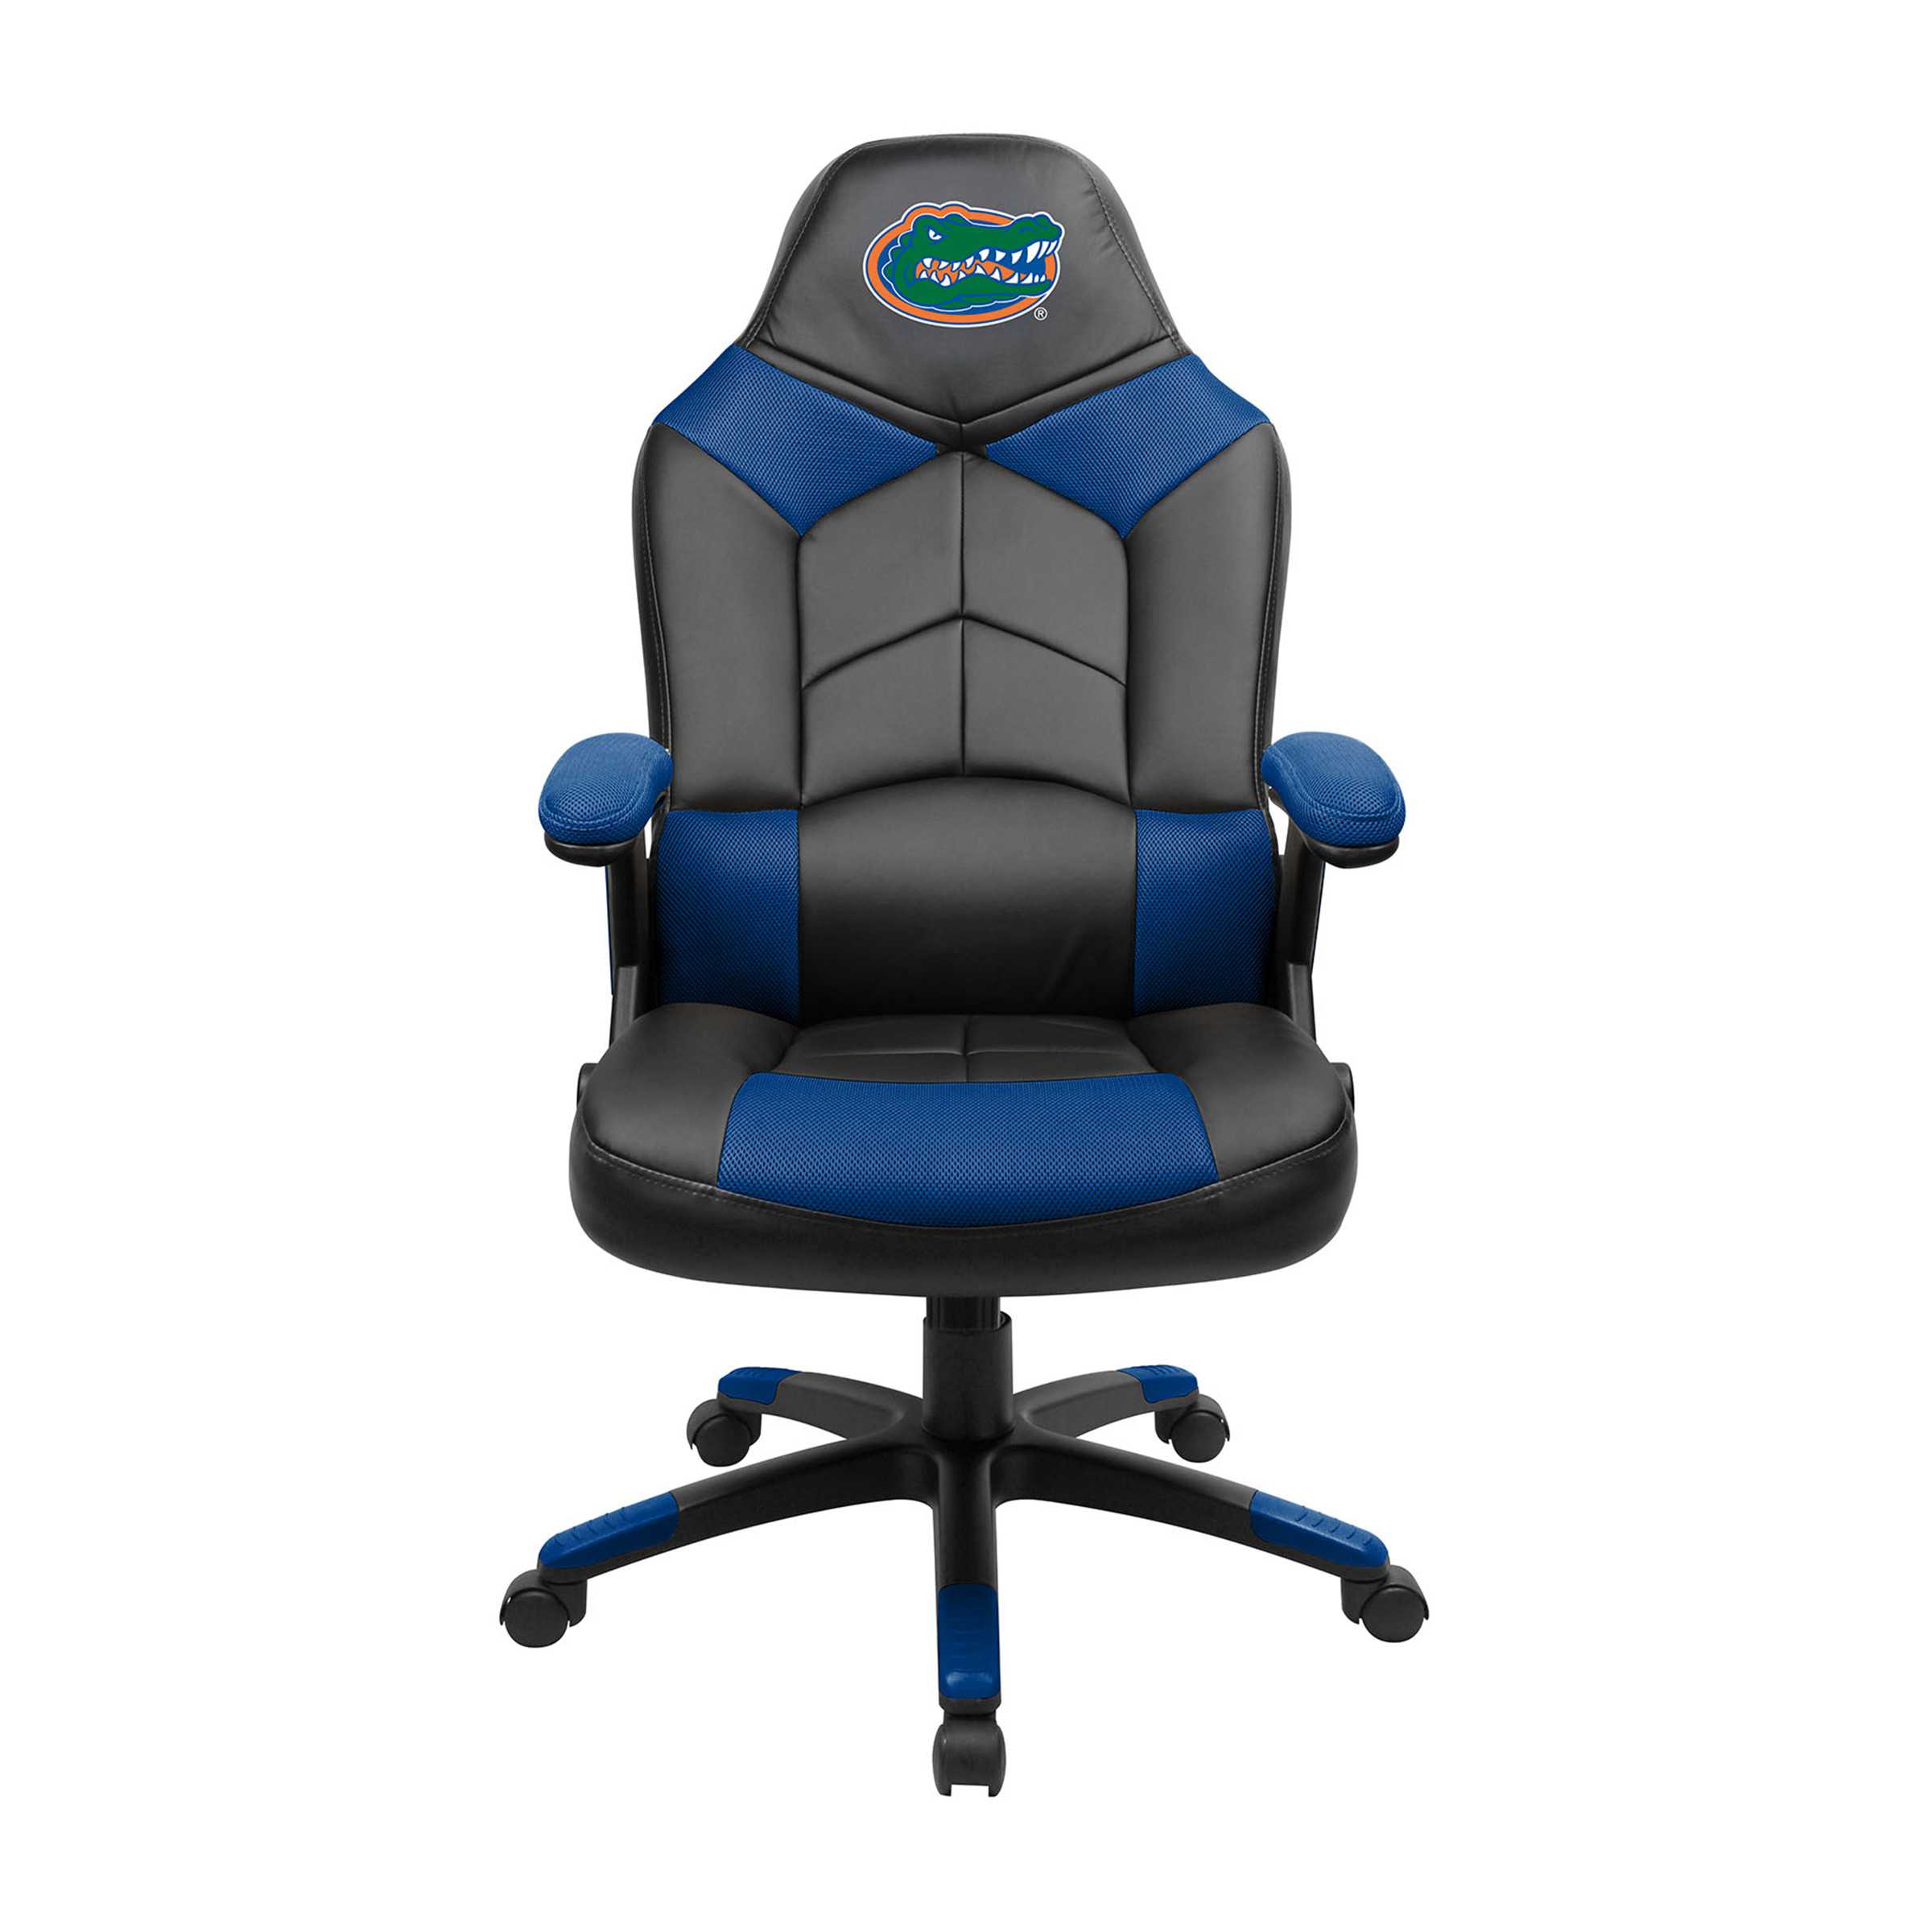 UNIVERSITY OF FLORIDA OVERSIZED GAMING CHAIR